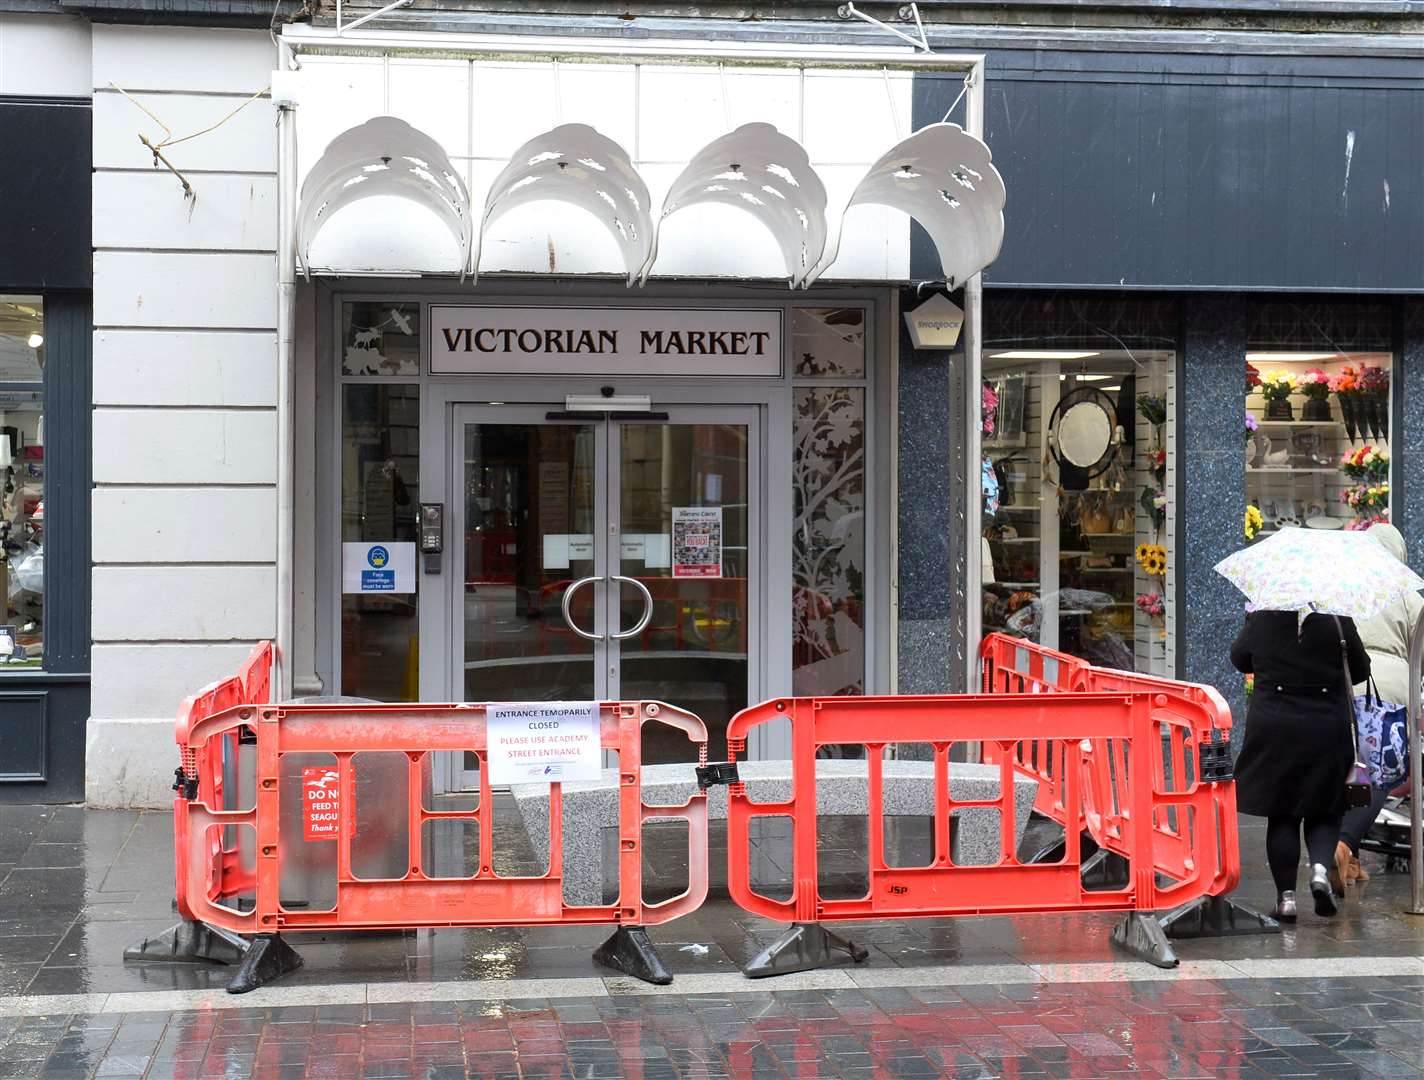 Small piece of masonry believed to be from ornate stonework landed at entrance to the Victorian Market on Union Street entrance..Picture: Gary Anthony..